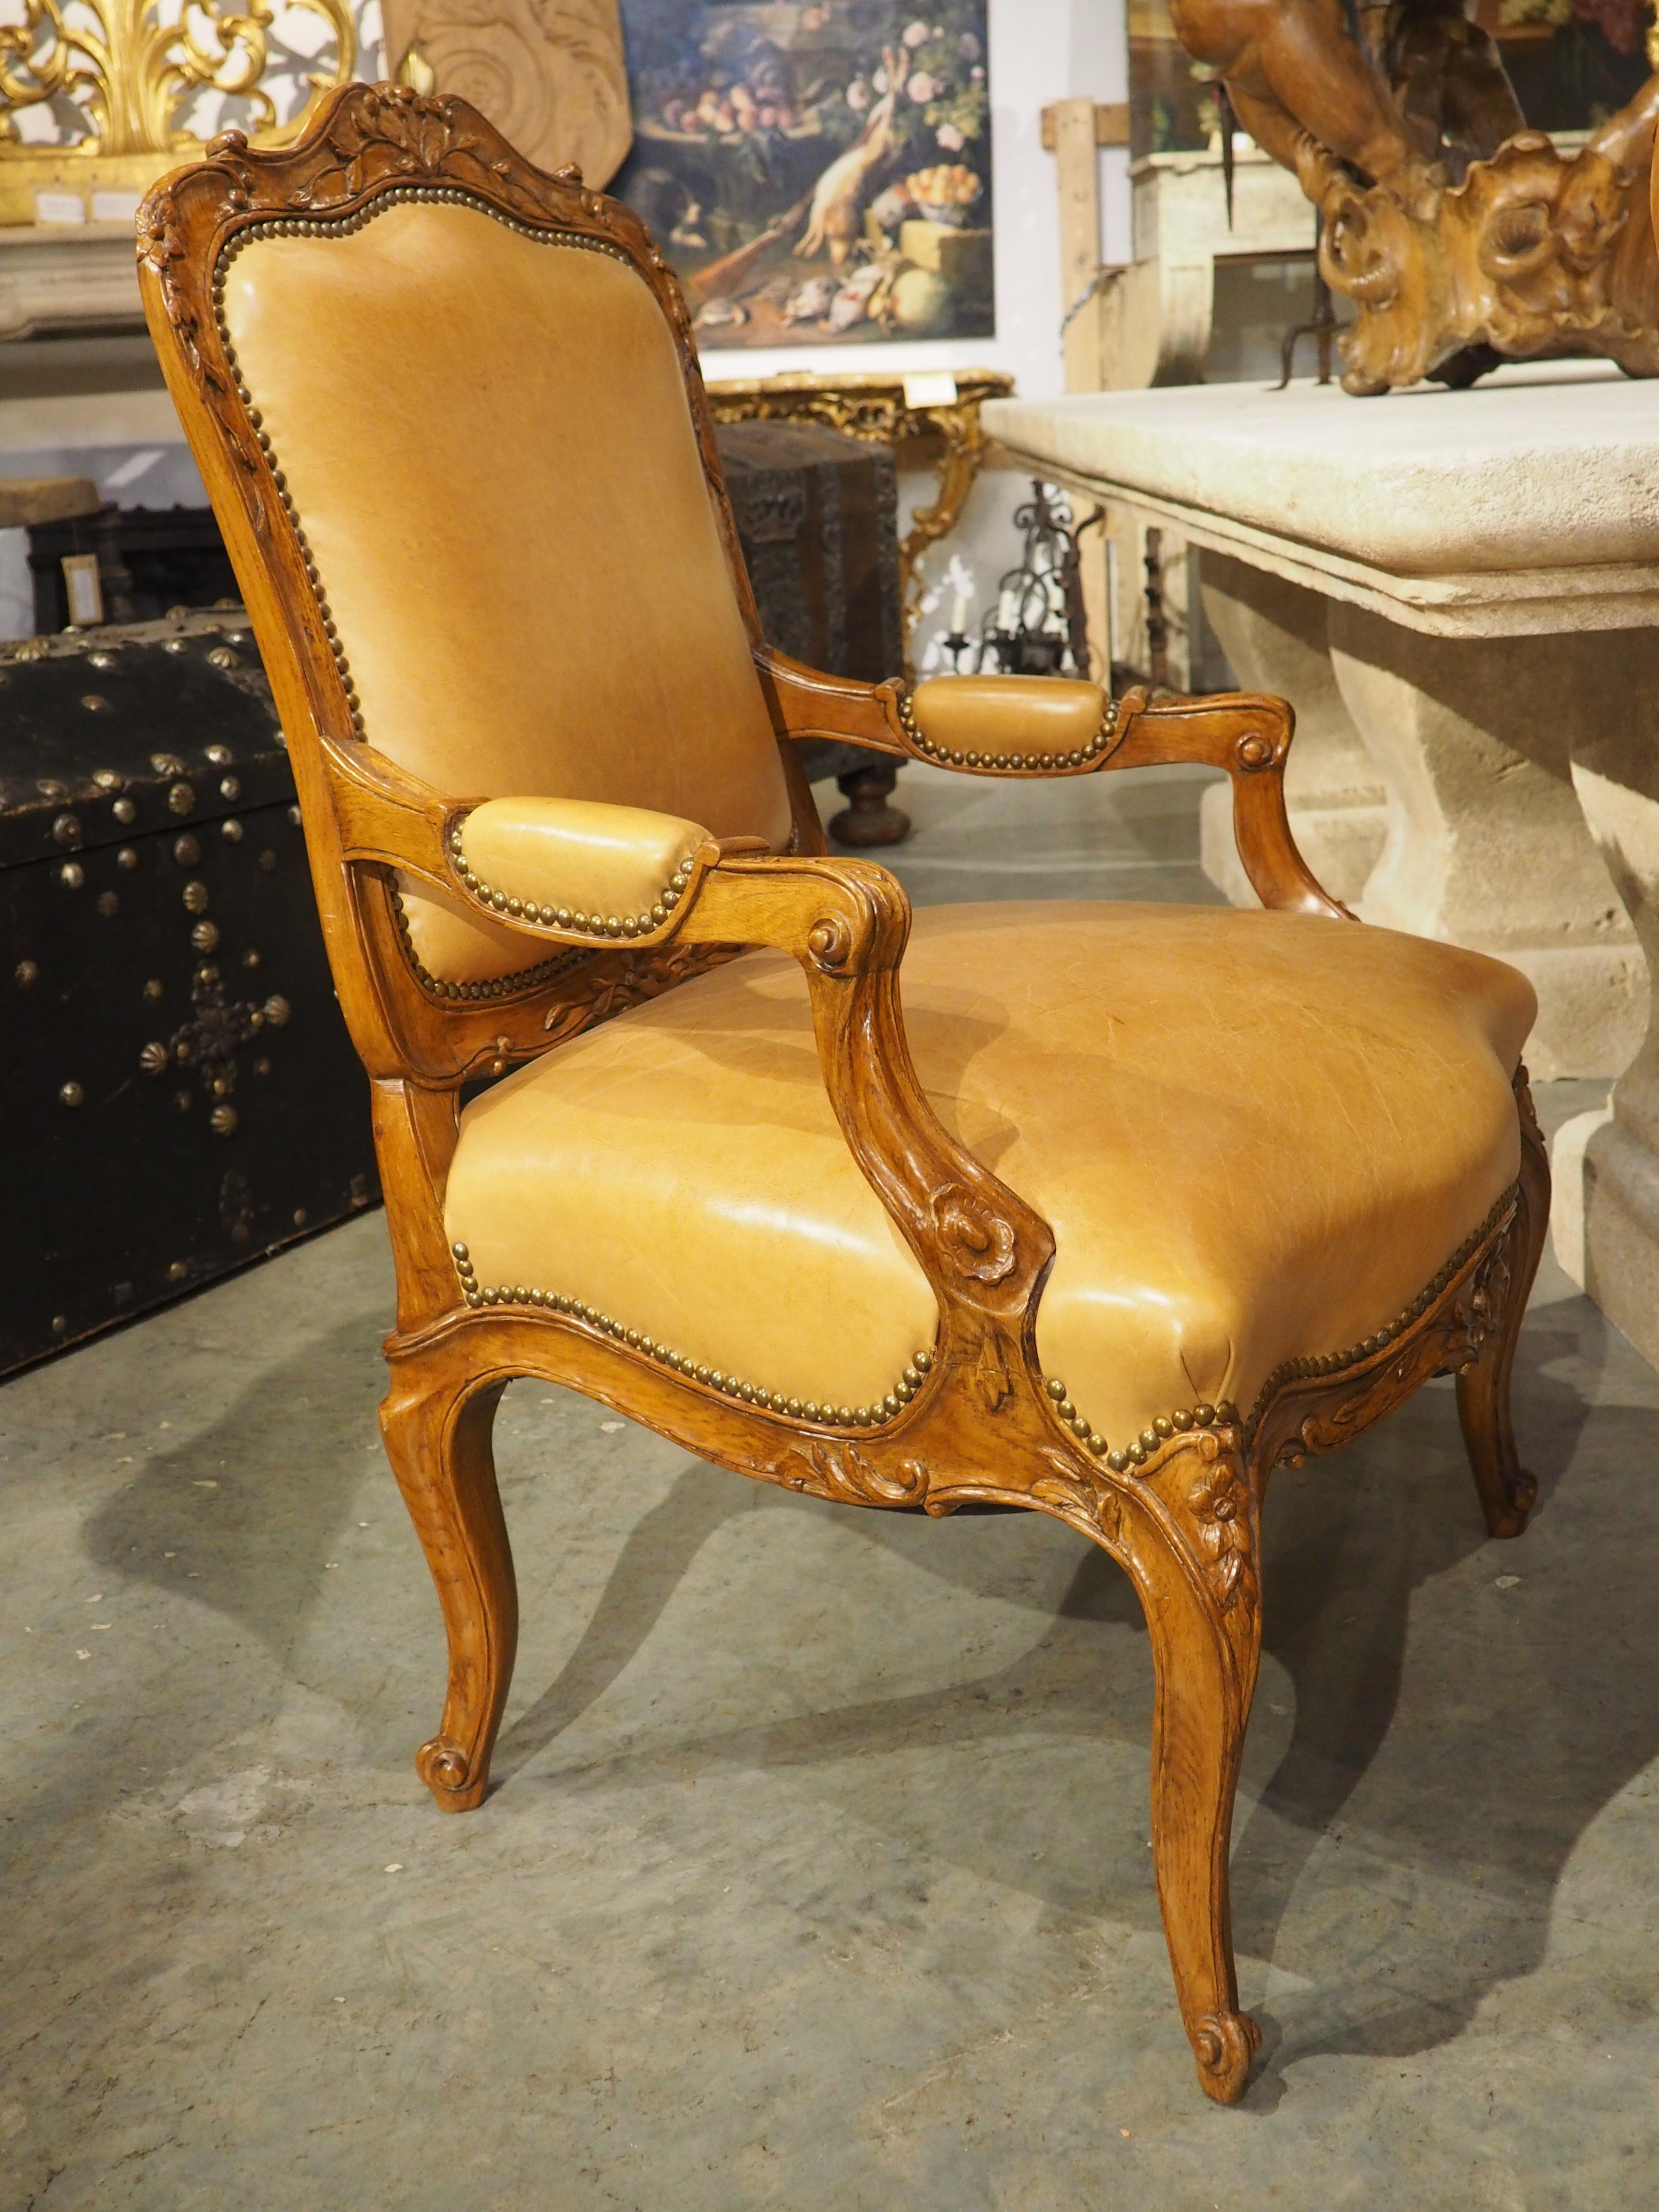 Pair of French Carved Regence Style Armchairs with Leather Upholstery, C. 1900 For Sale 6